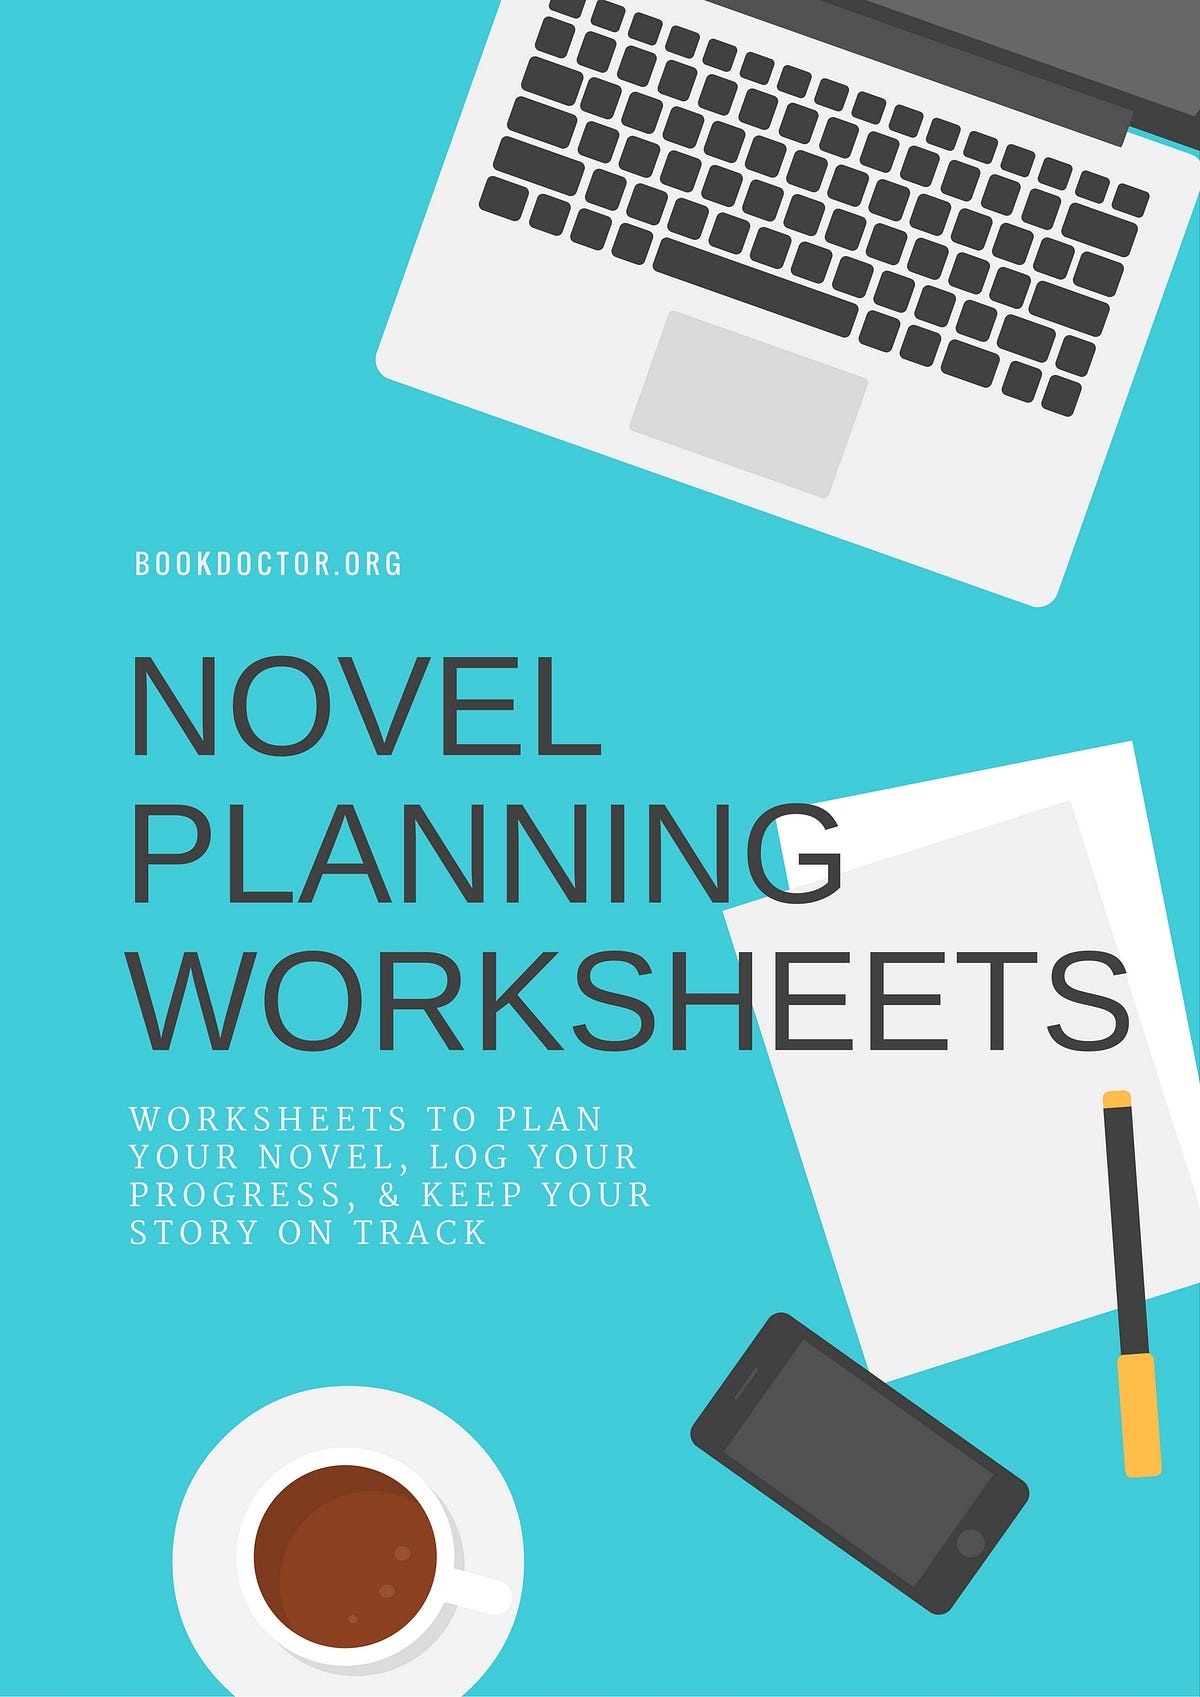 Worksheets to help you write your novel